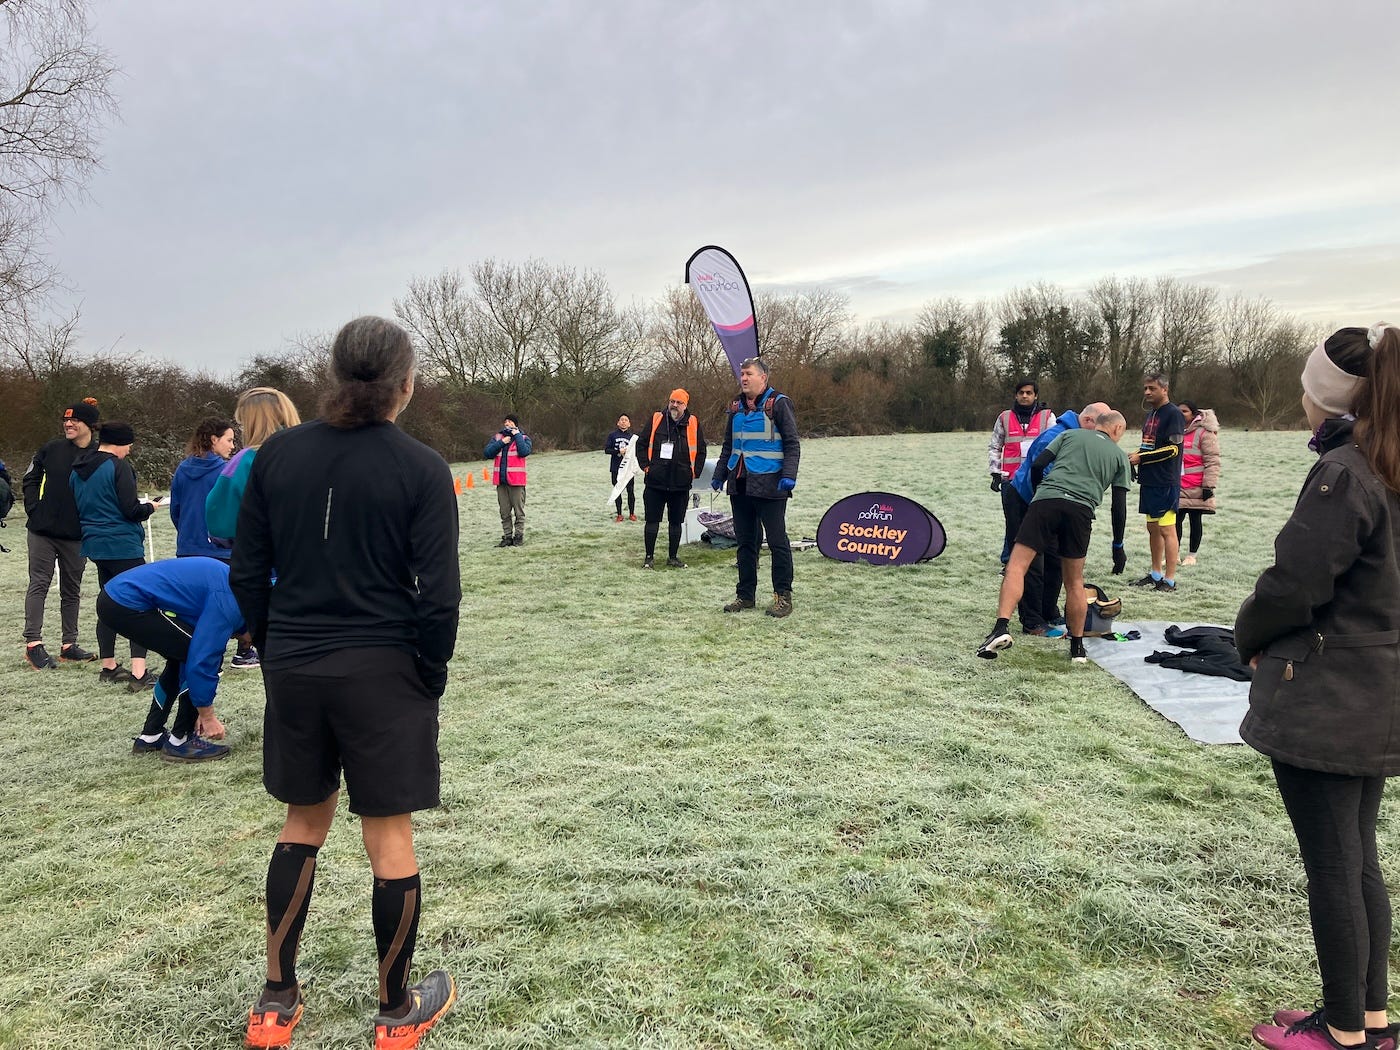 People gathered round the parkrun flag in the middle of a field